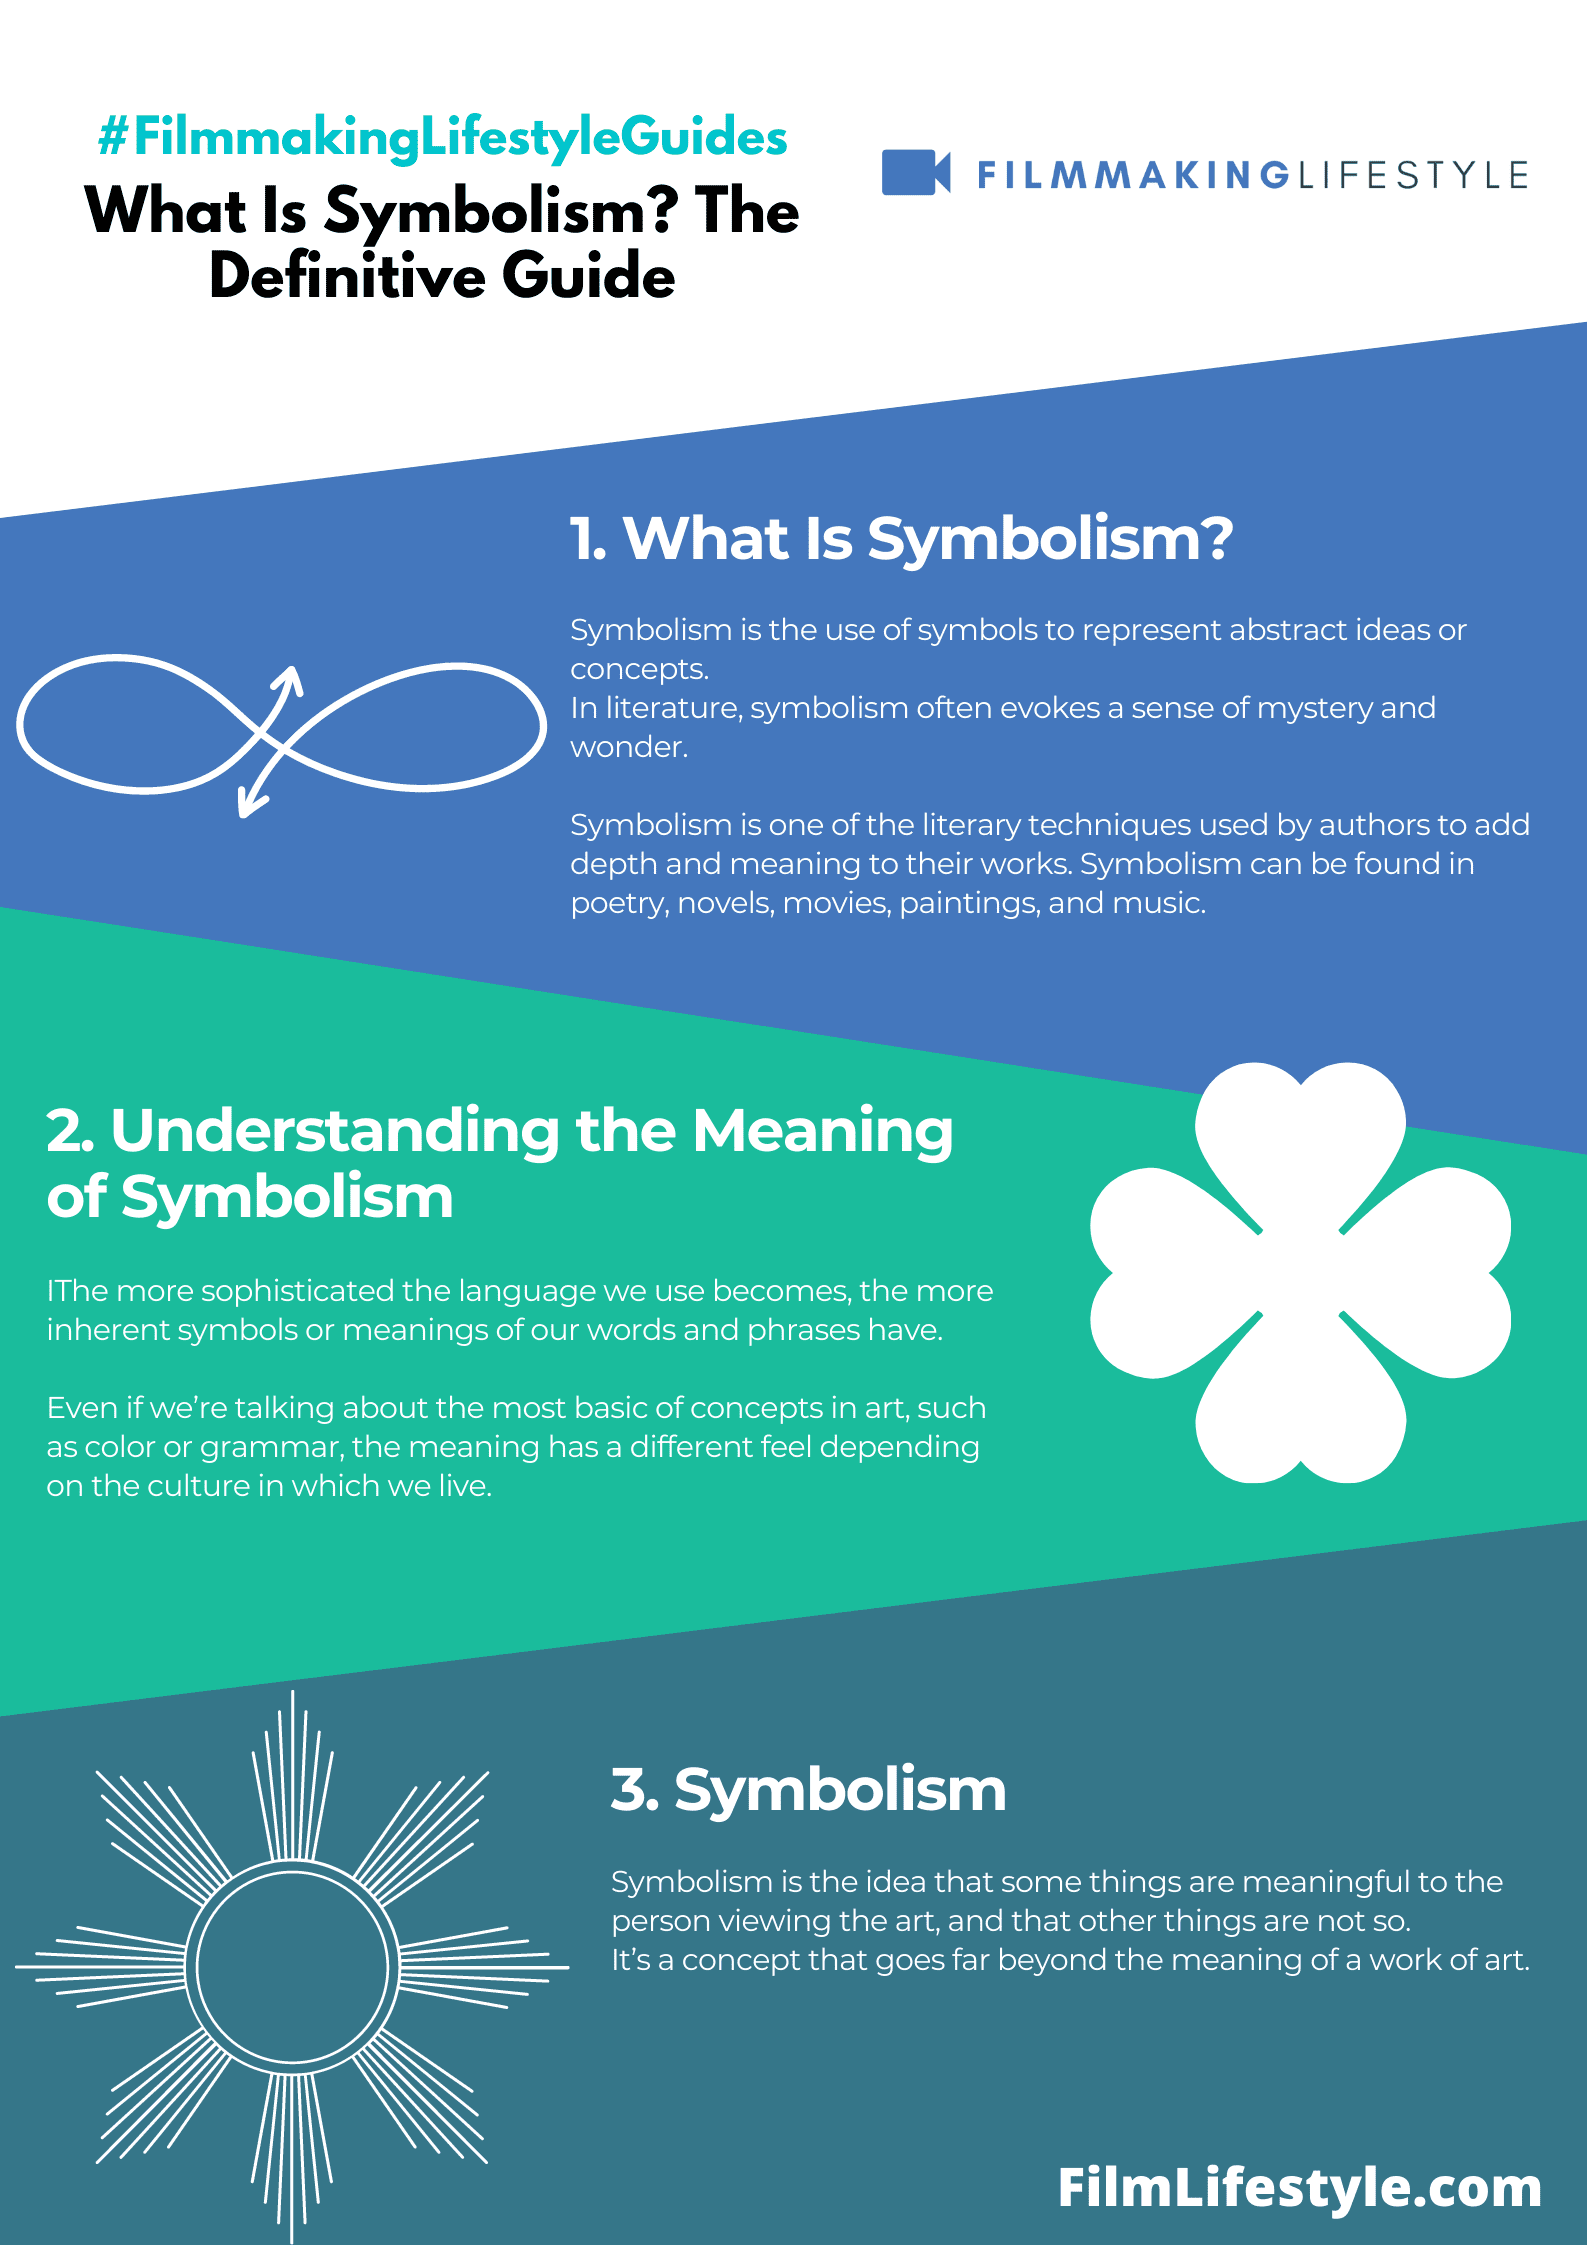 What does mostly symbolic mean?